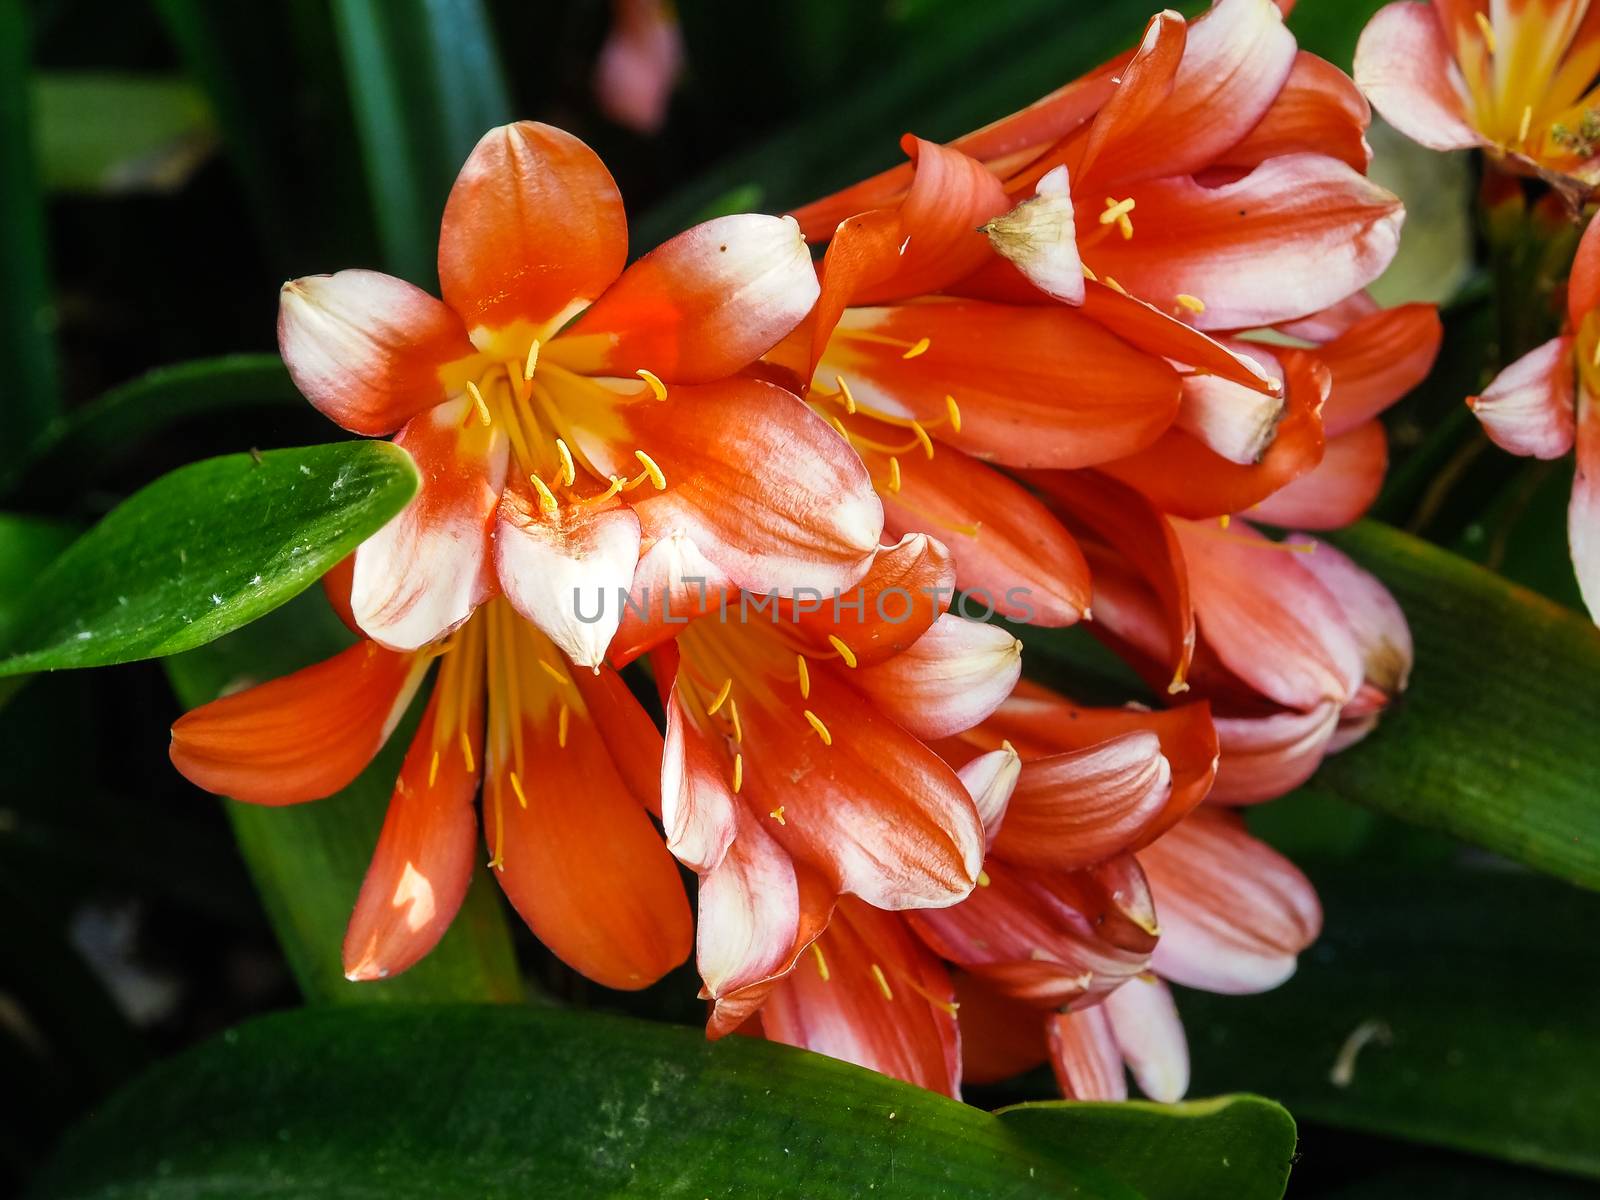 Details of a Natal lily flower. A flowering head of Clivia miniata (also known as bush lily, Kaffir lily).